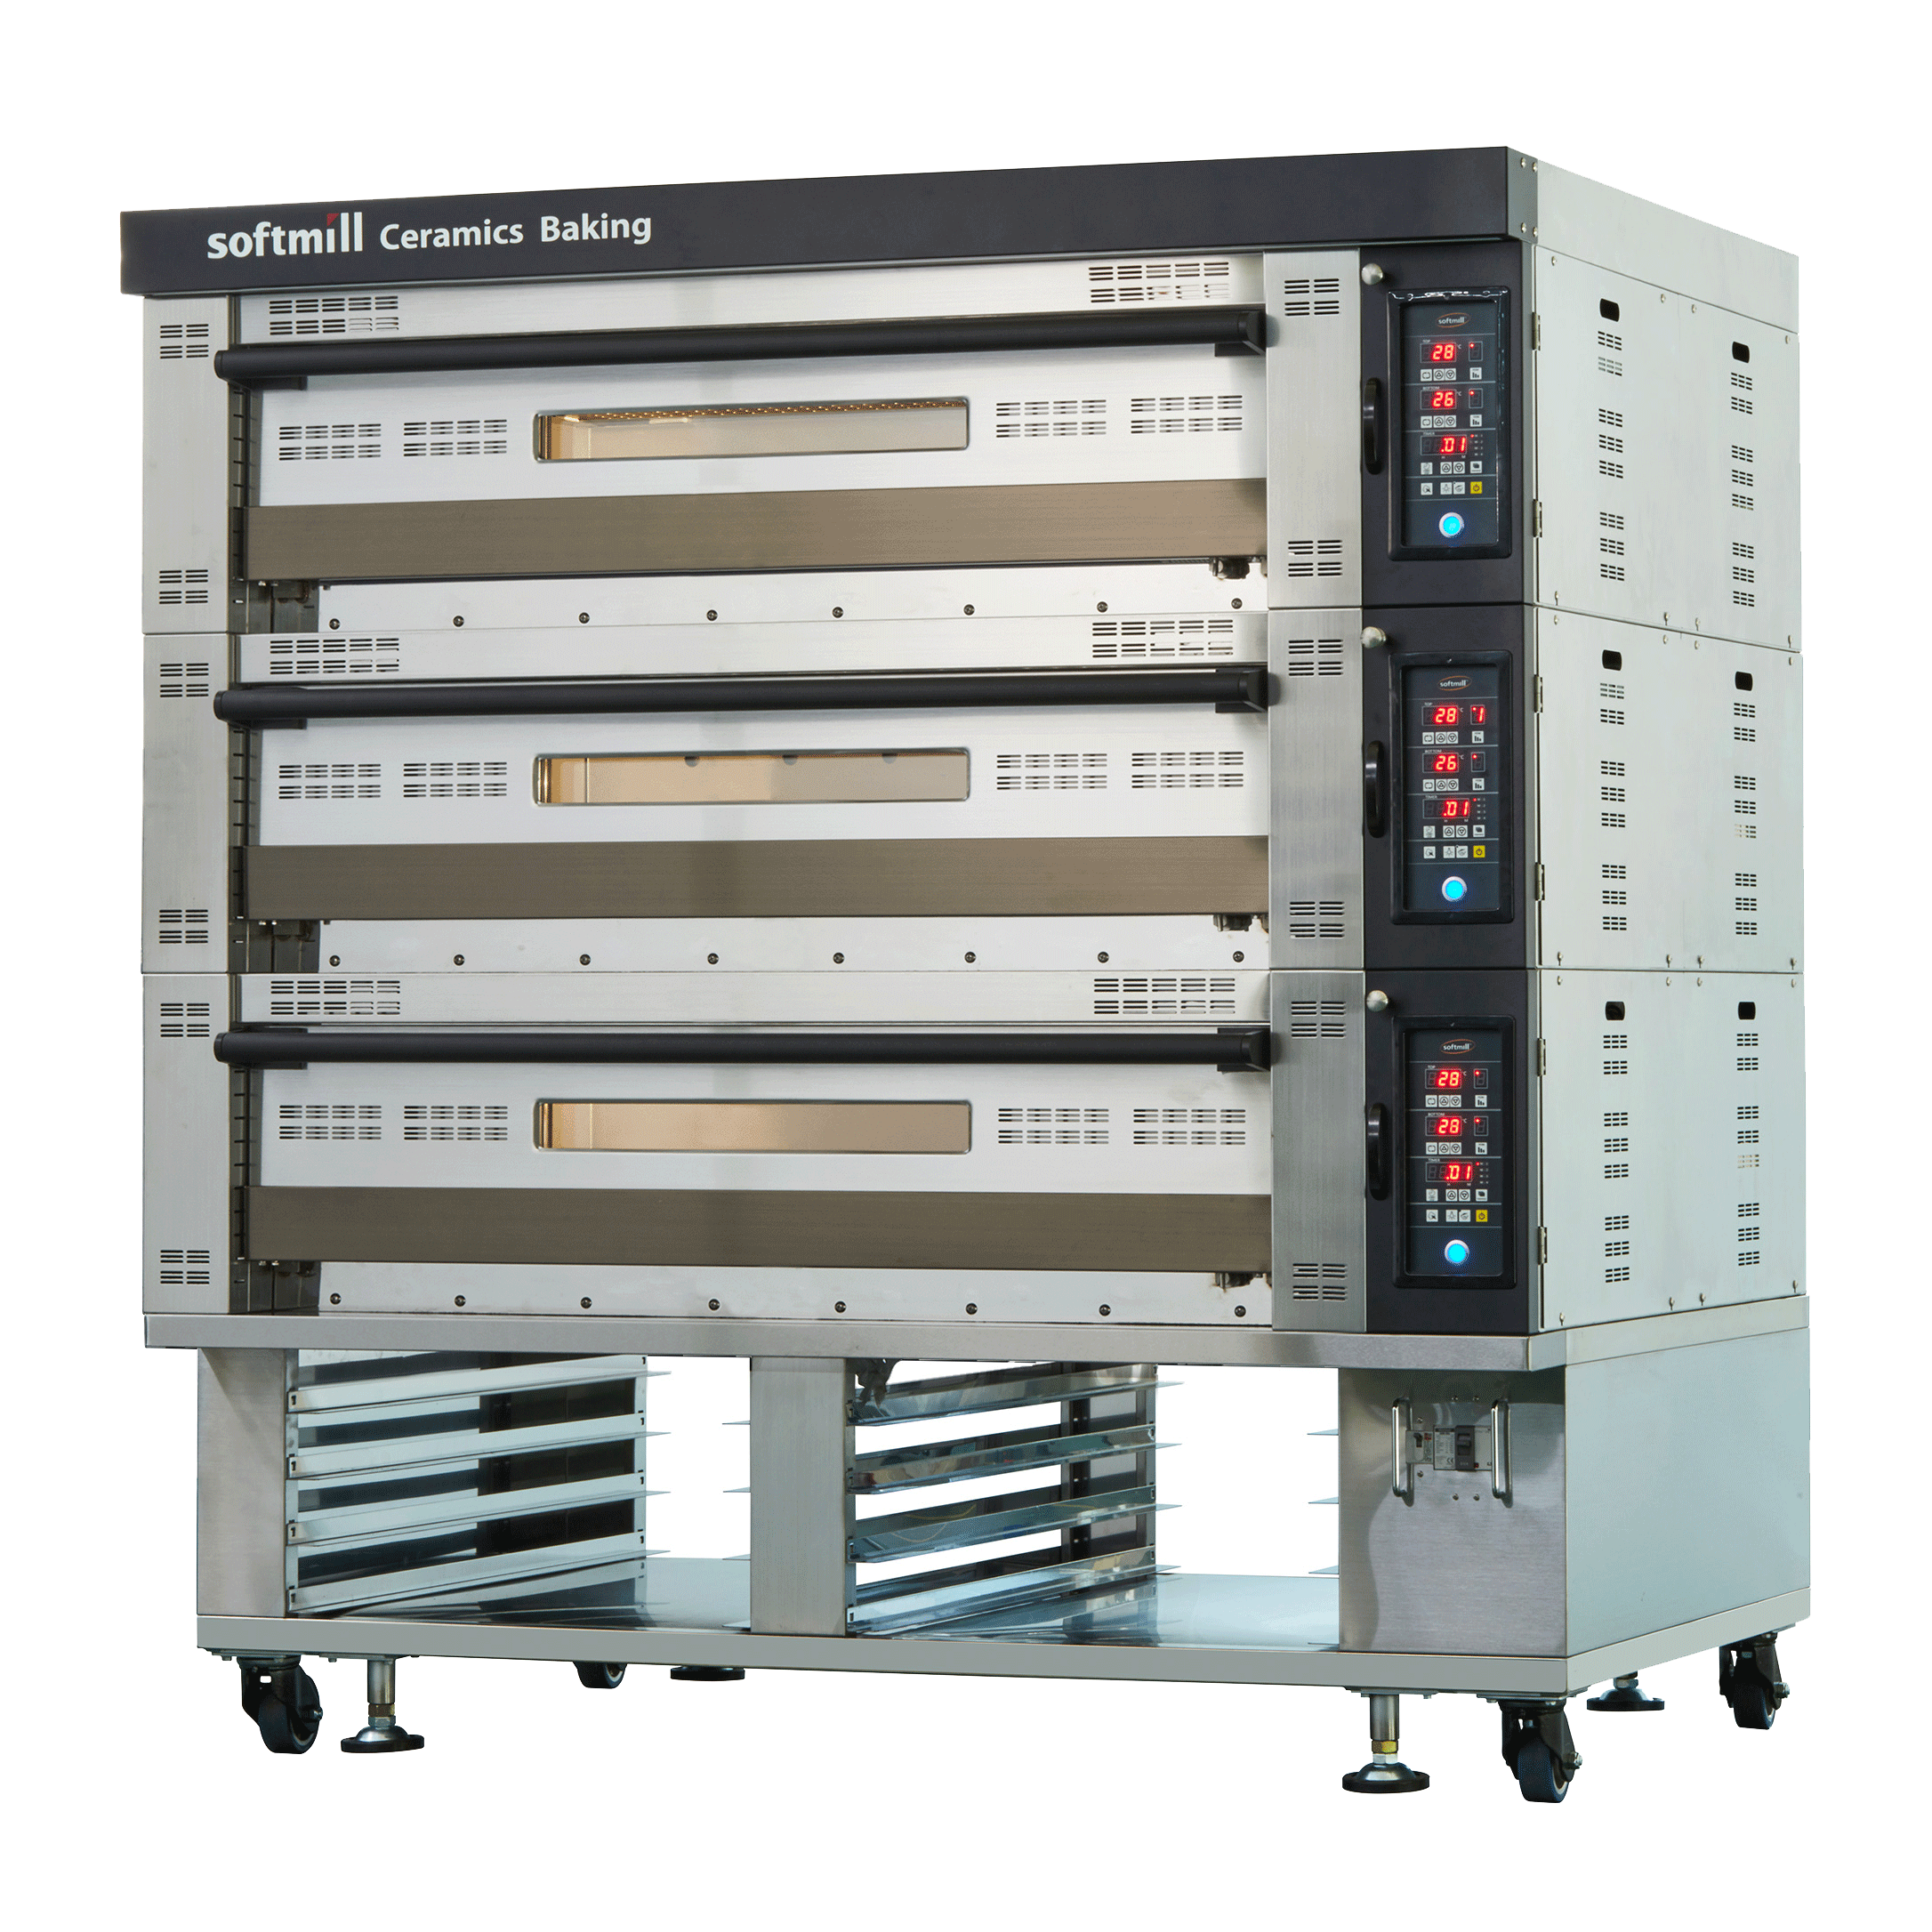 Convergence Oven 4 trays 3 tiers detail page link